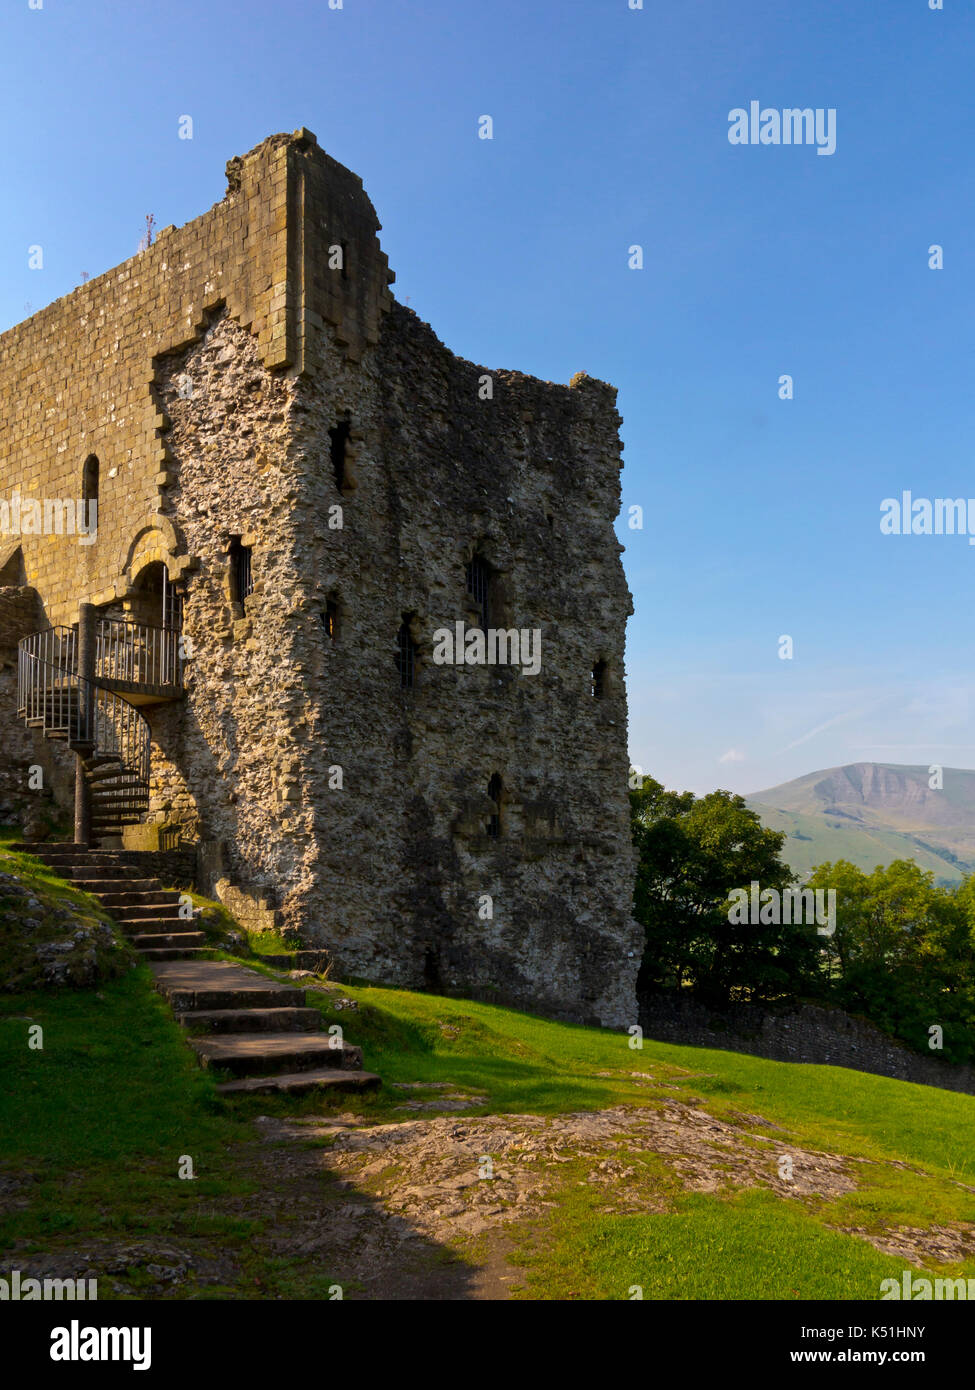 Peveril Castle a ruined 11th century castle overlooking the village of Castleton in the Derbyshire Peak District England UK Stock Photo